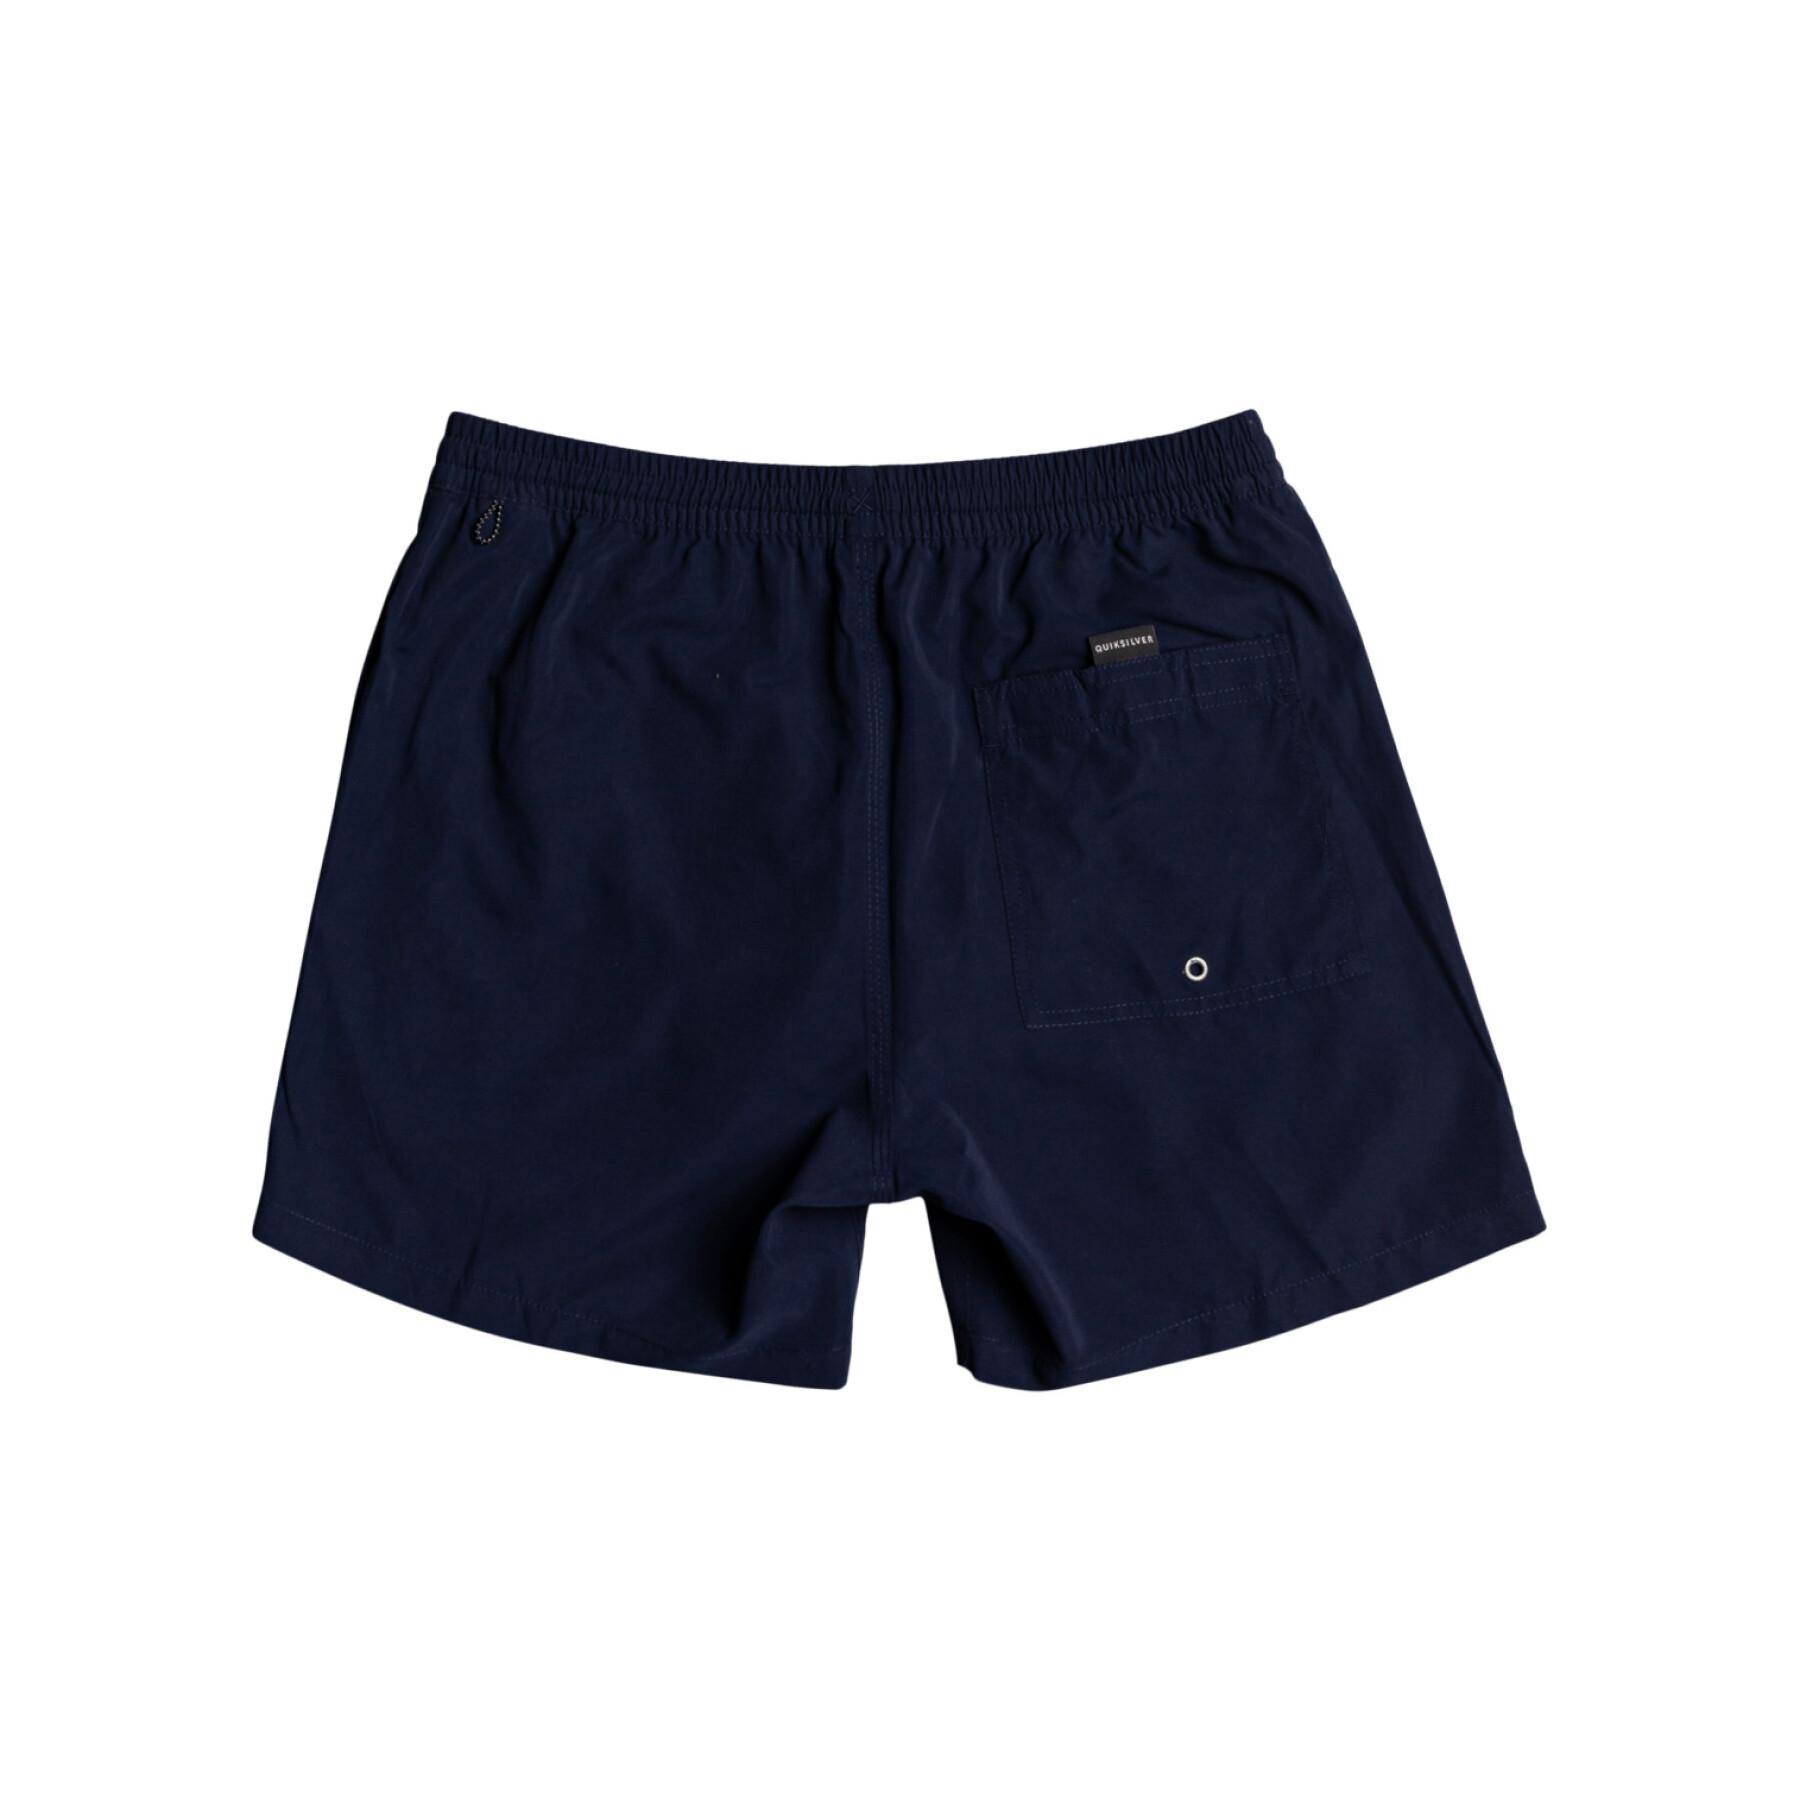 Children's swimming shorts Quiksilver Everyday Volley 13